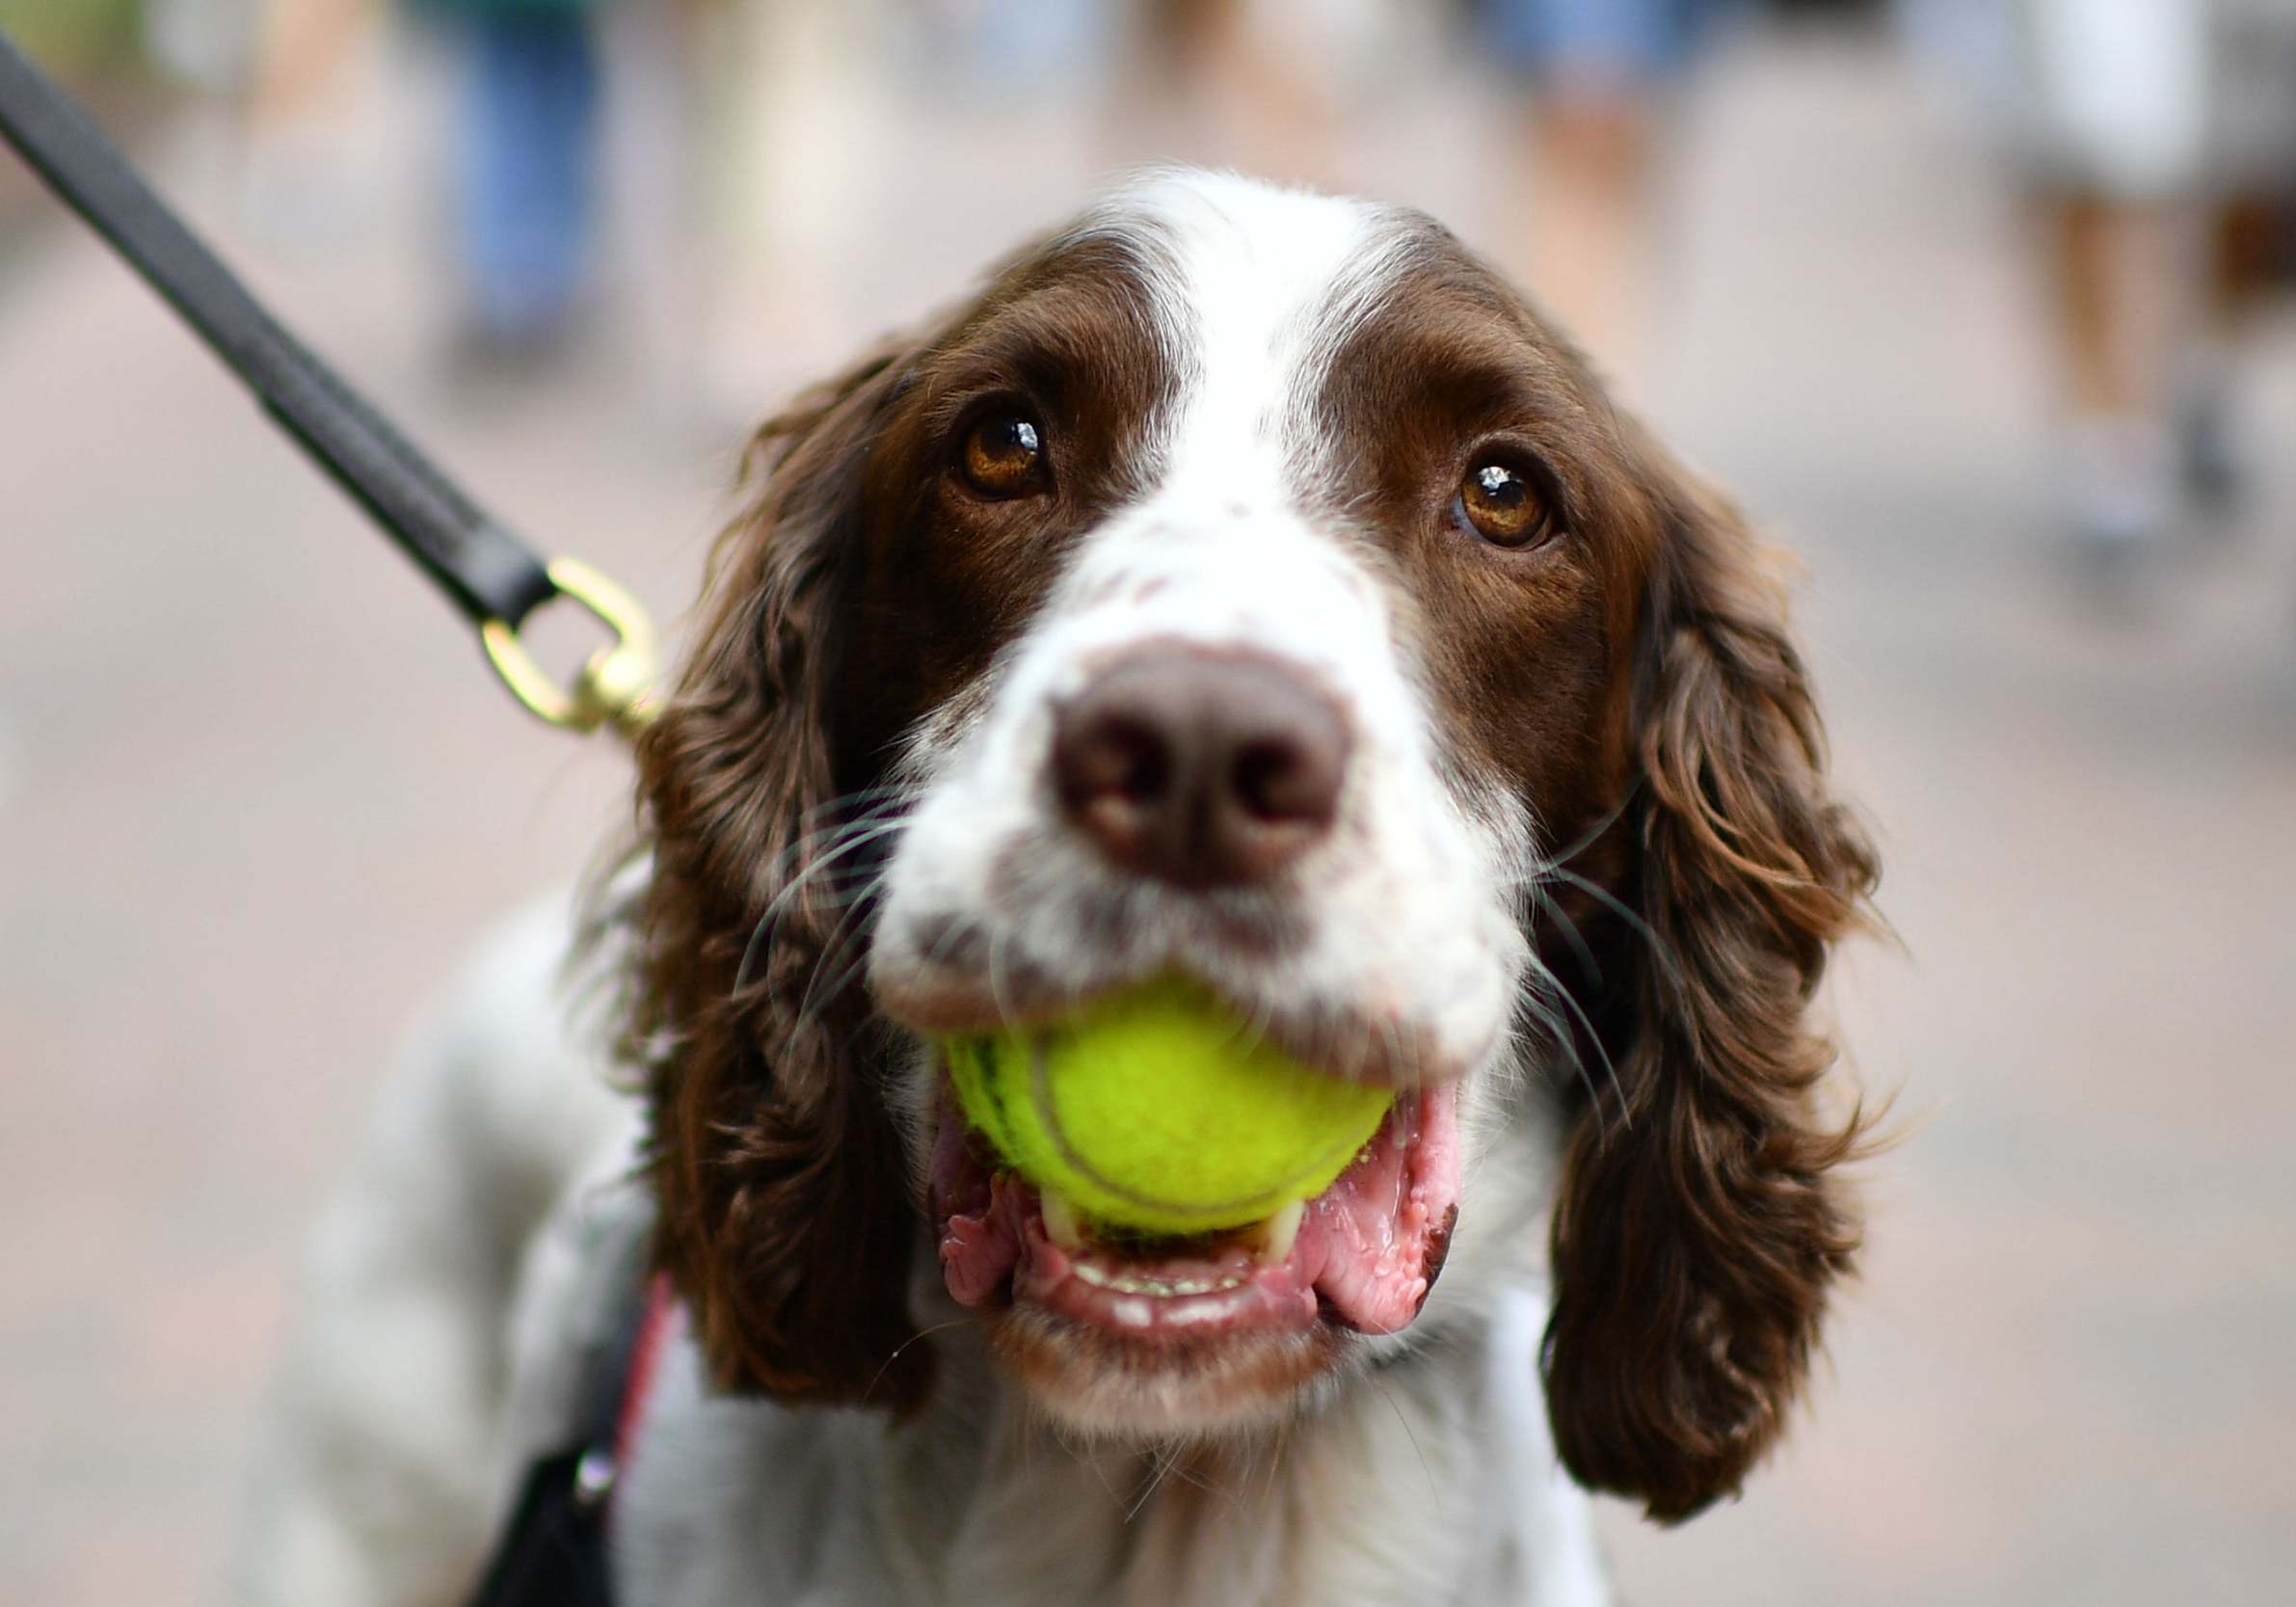 A police dog carries a tennis ball in his mouth at The All England Tennis Club in Wimbledon